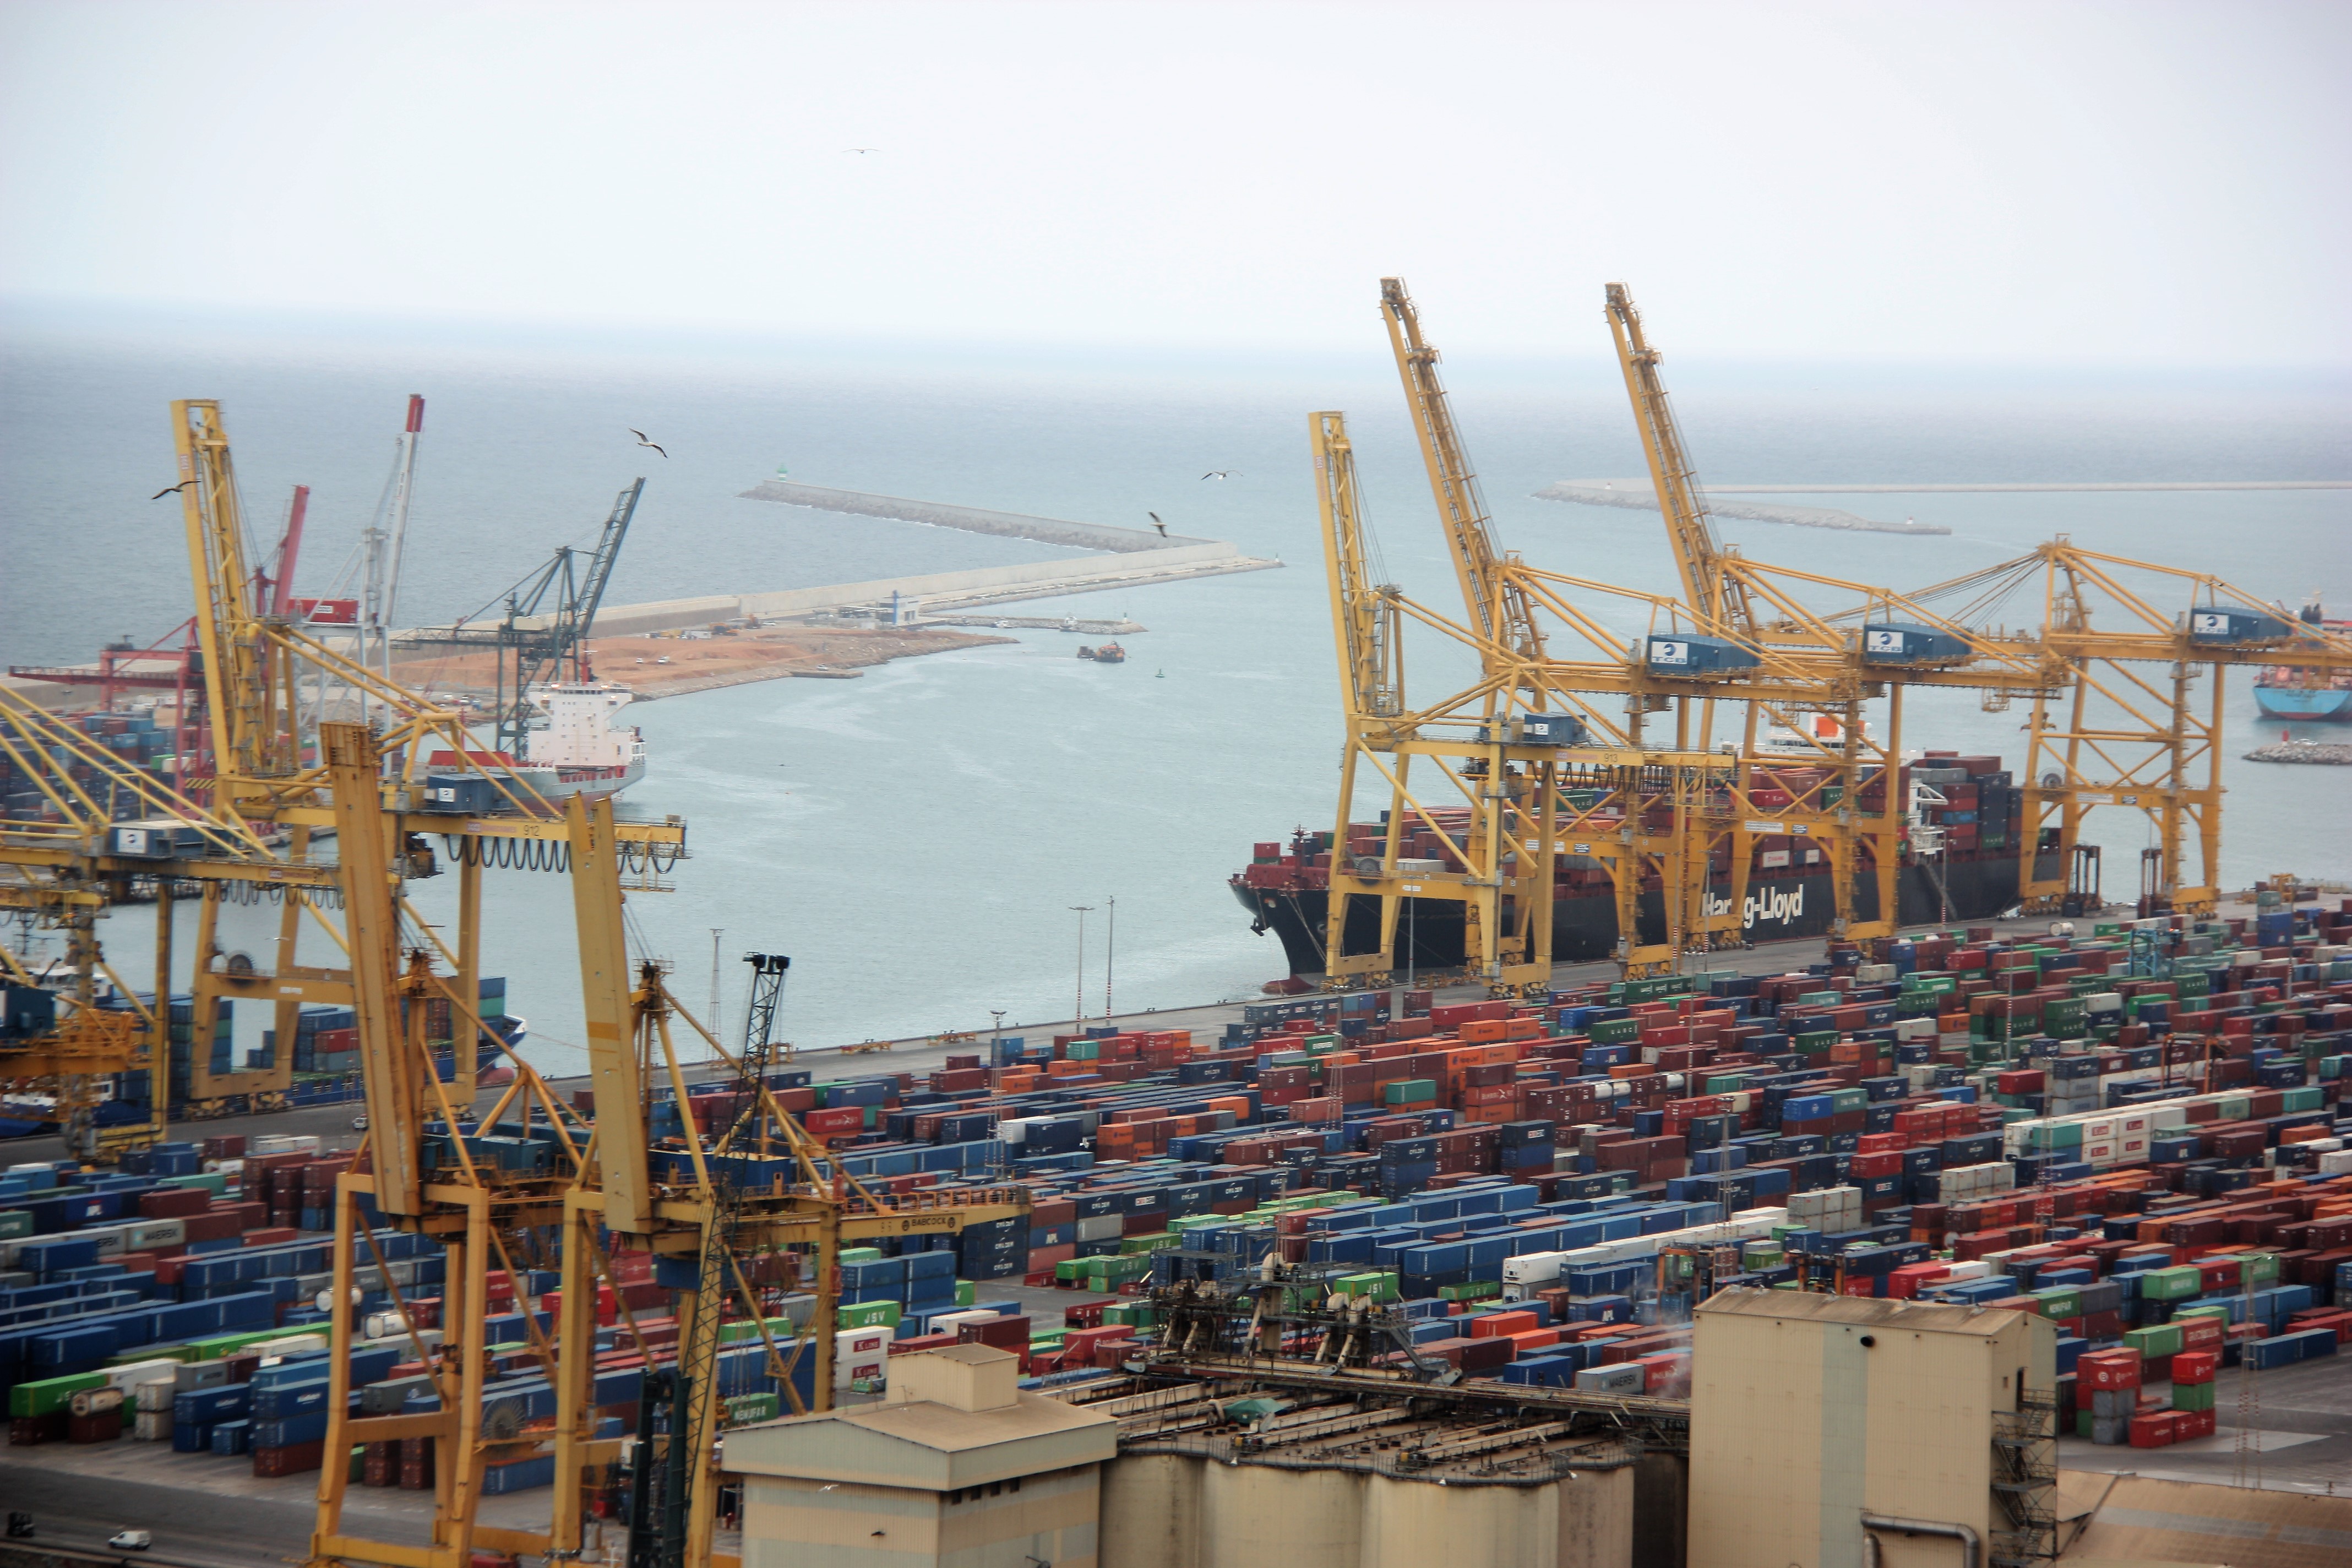 100 stevedores out of the 1,100 in the Port of Barcelona worked due to the strike (by ACN)